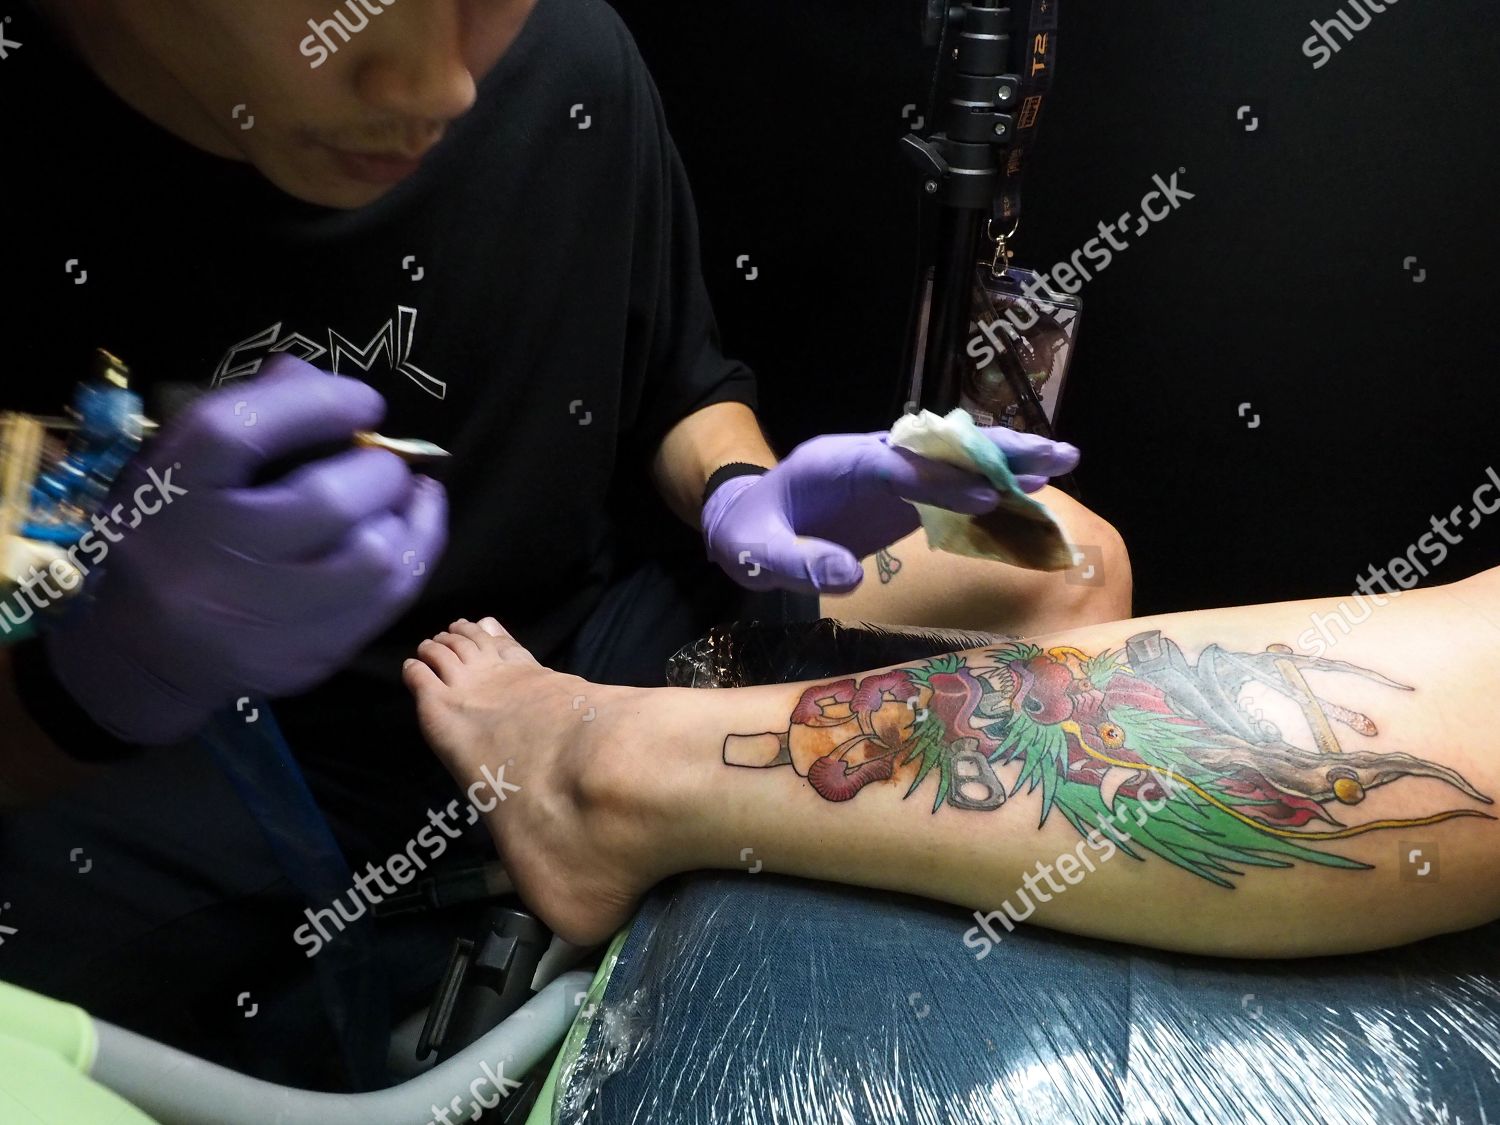 CK Tattoo Studio & Training Academy - A Tattoo stays with YOU for a  lifetime, get it done from the best tattoo artists at CK Tattoo Studio.  BOOK YOUR APPOINTMENT NOW! Ck